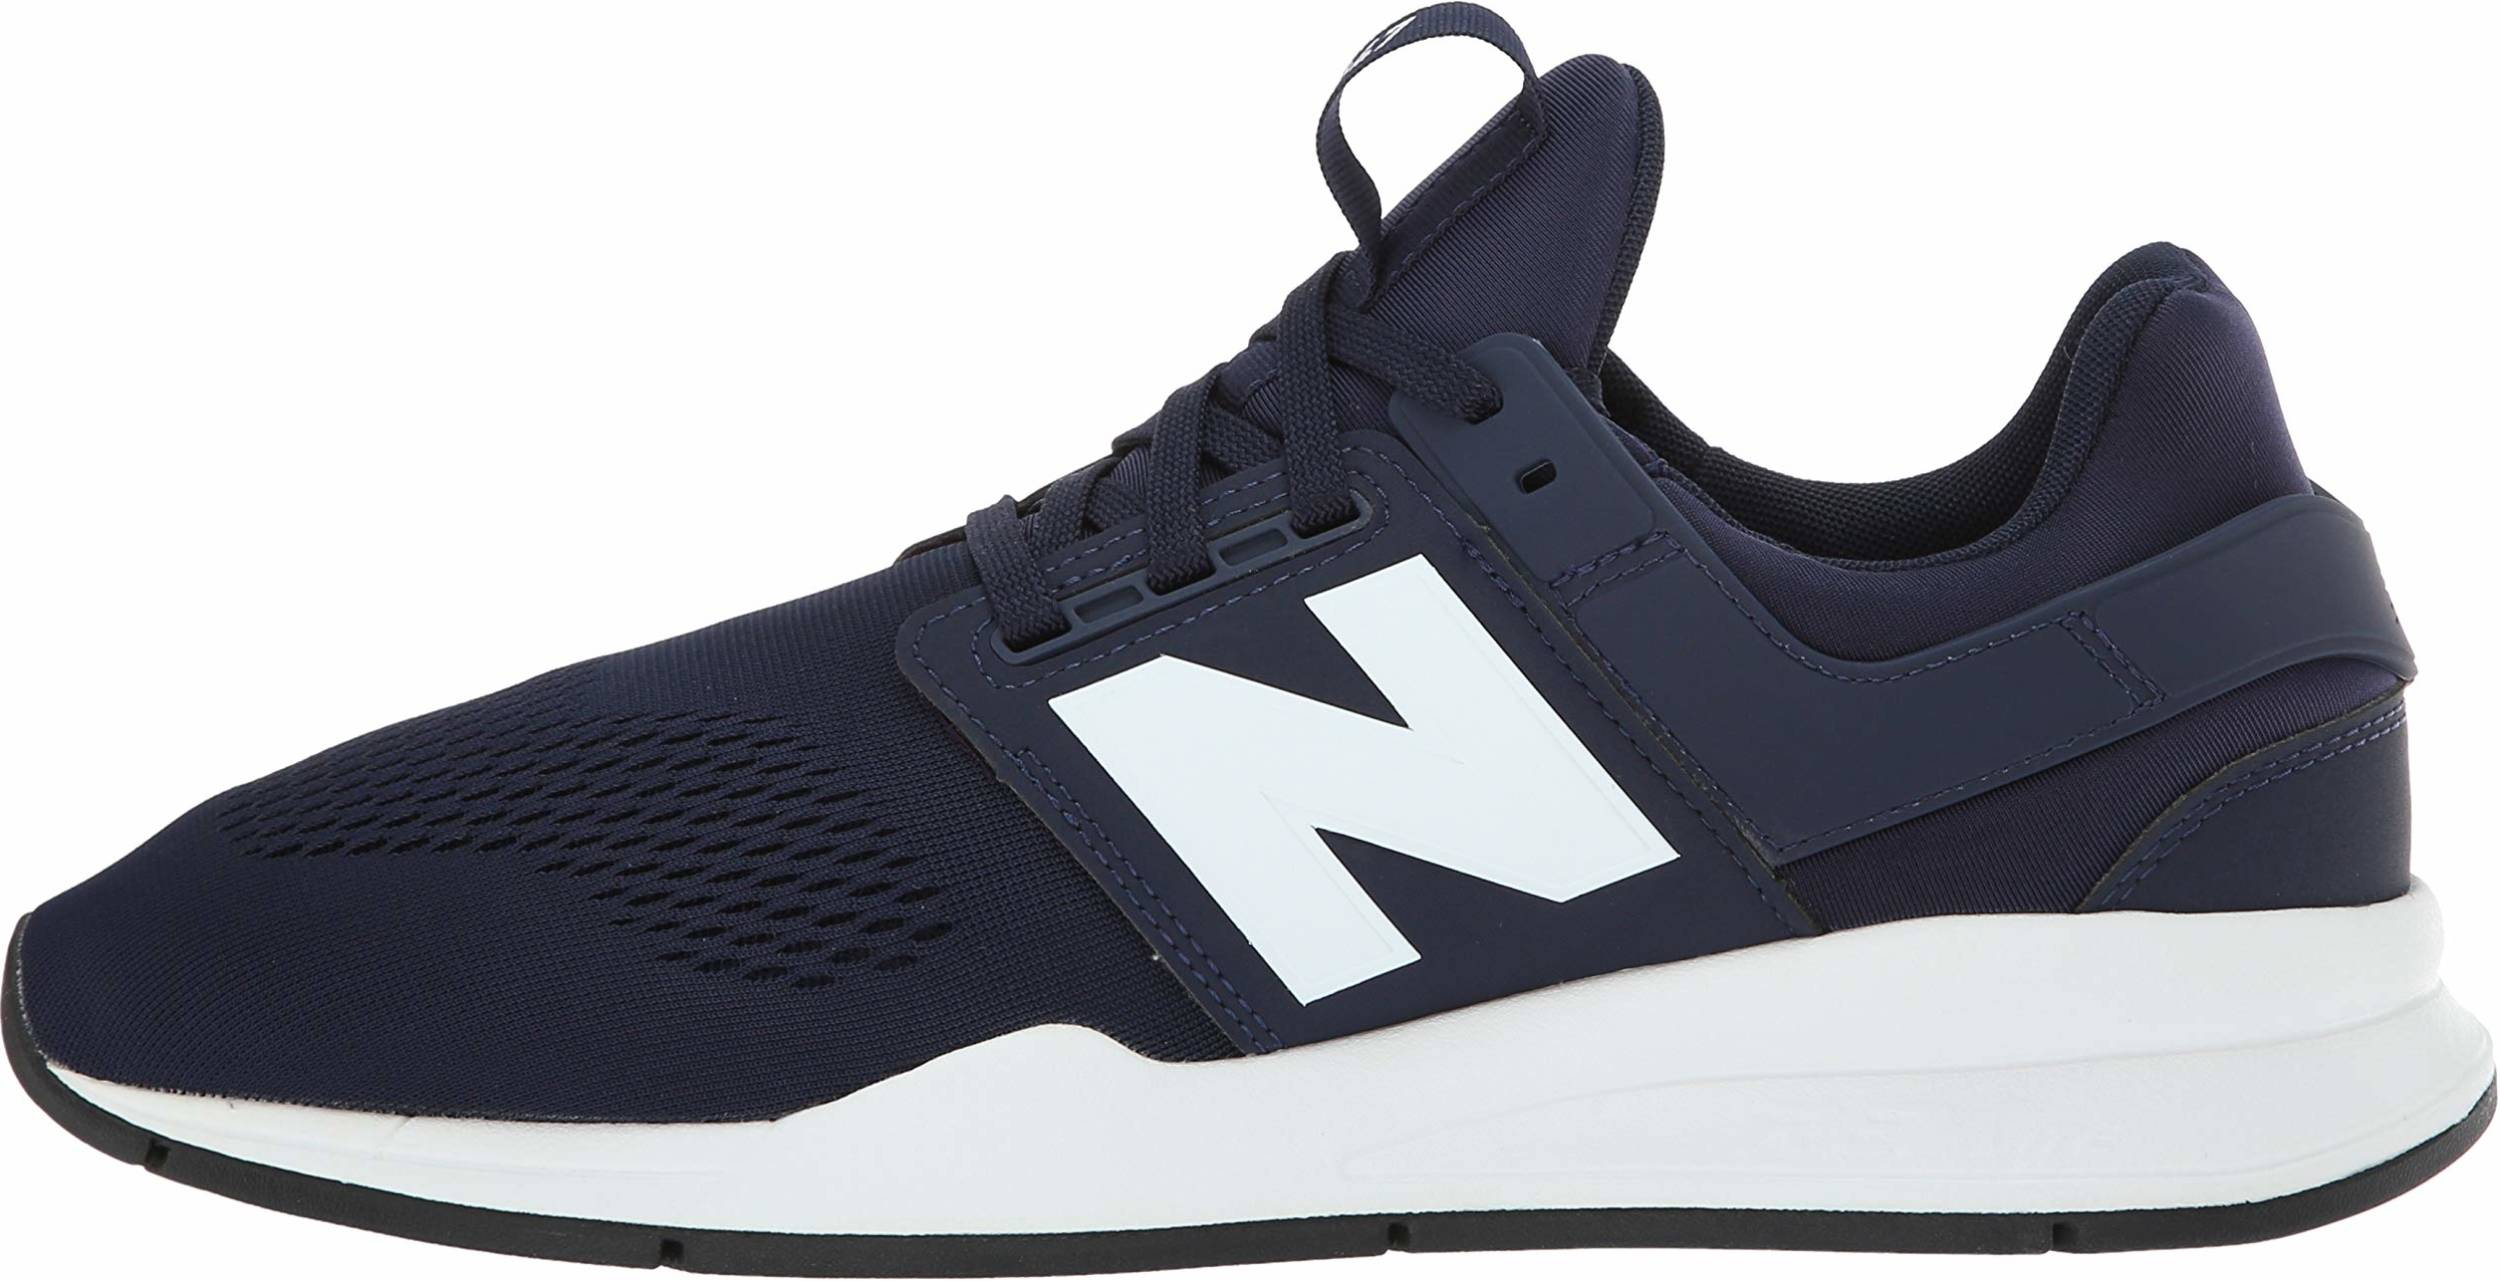 New Balance 247 v2 sneakers in 10 colors (only $37) | RunRepeat